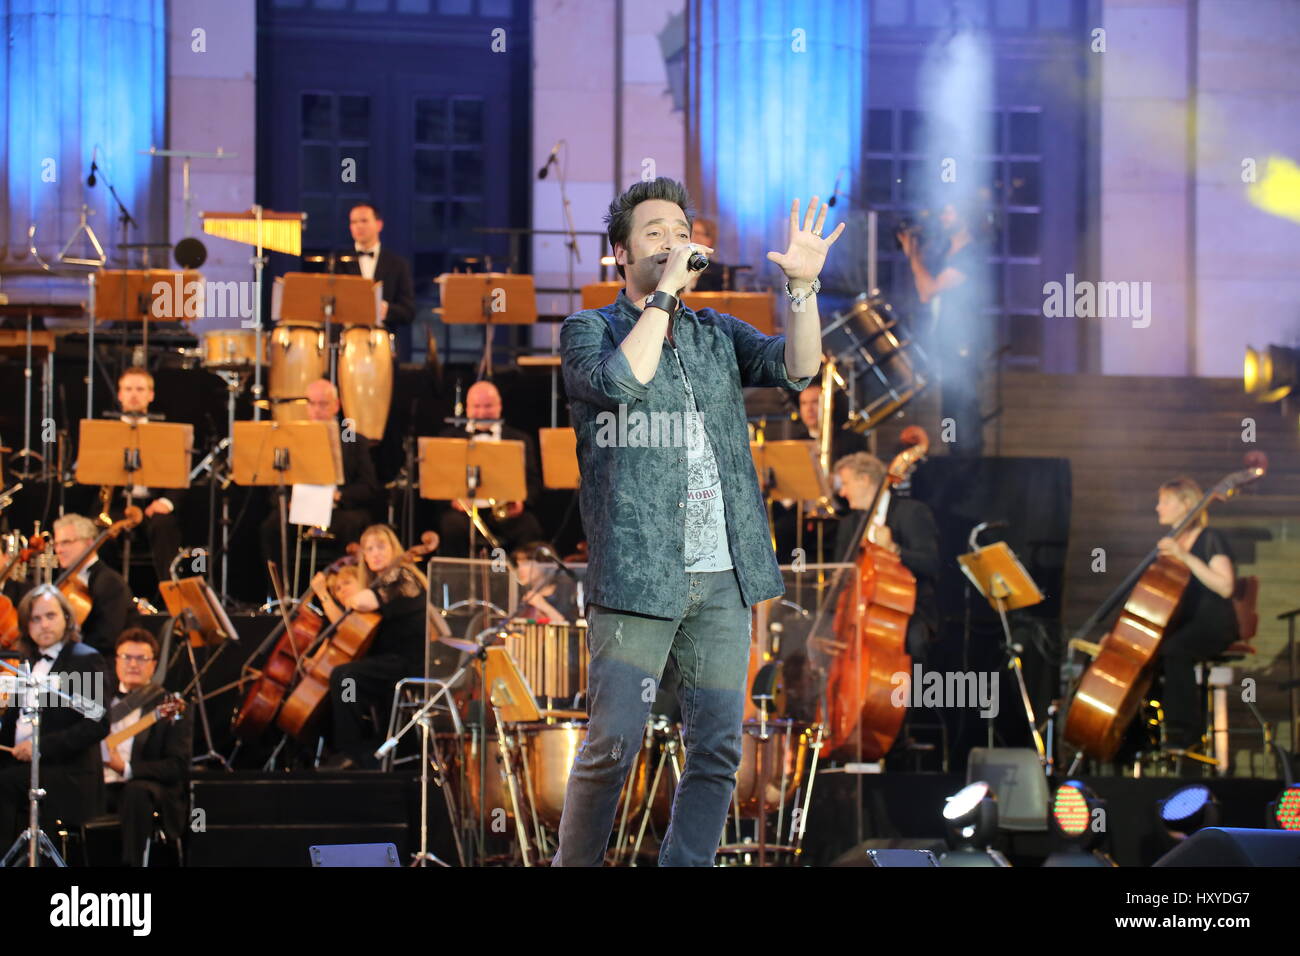 Berlin, Germany, July 2nd, 2015: Classic Open Air First Night concert. Stock Photo